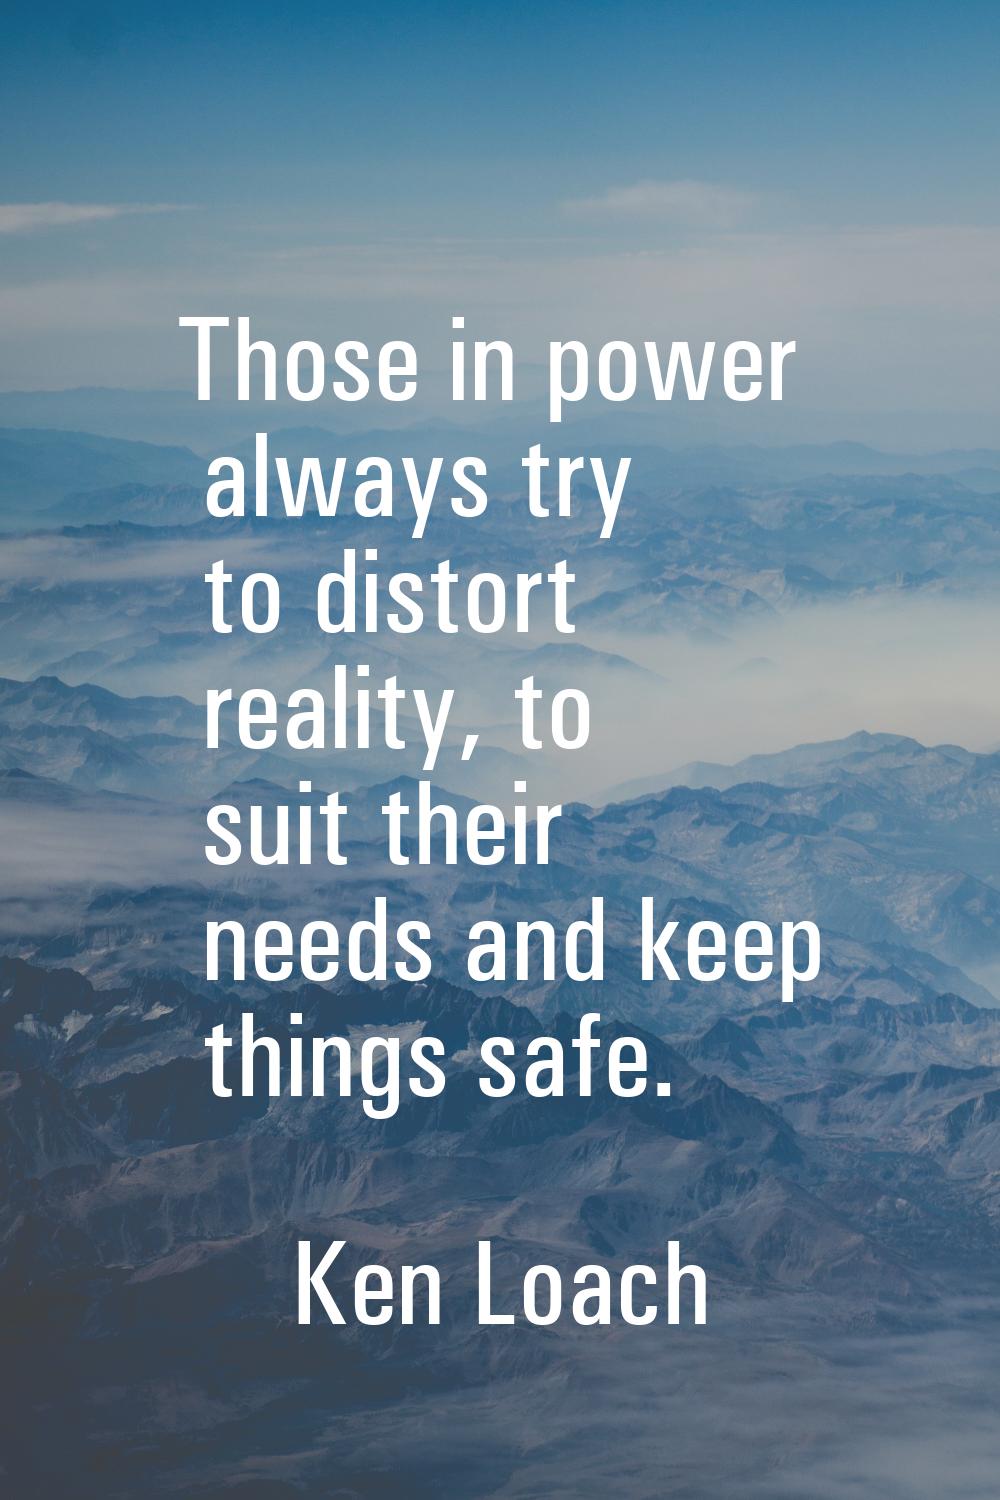 Those in power always try to distort reality, to suit their needs and keep things safe.